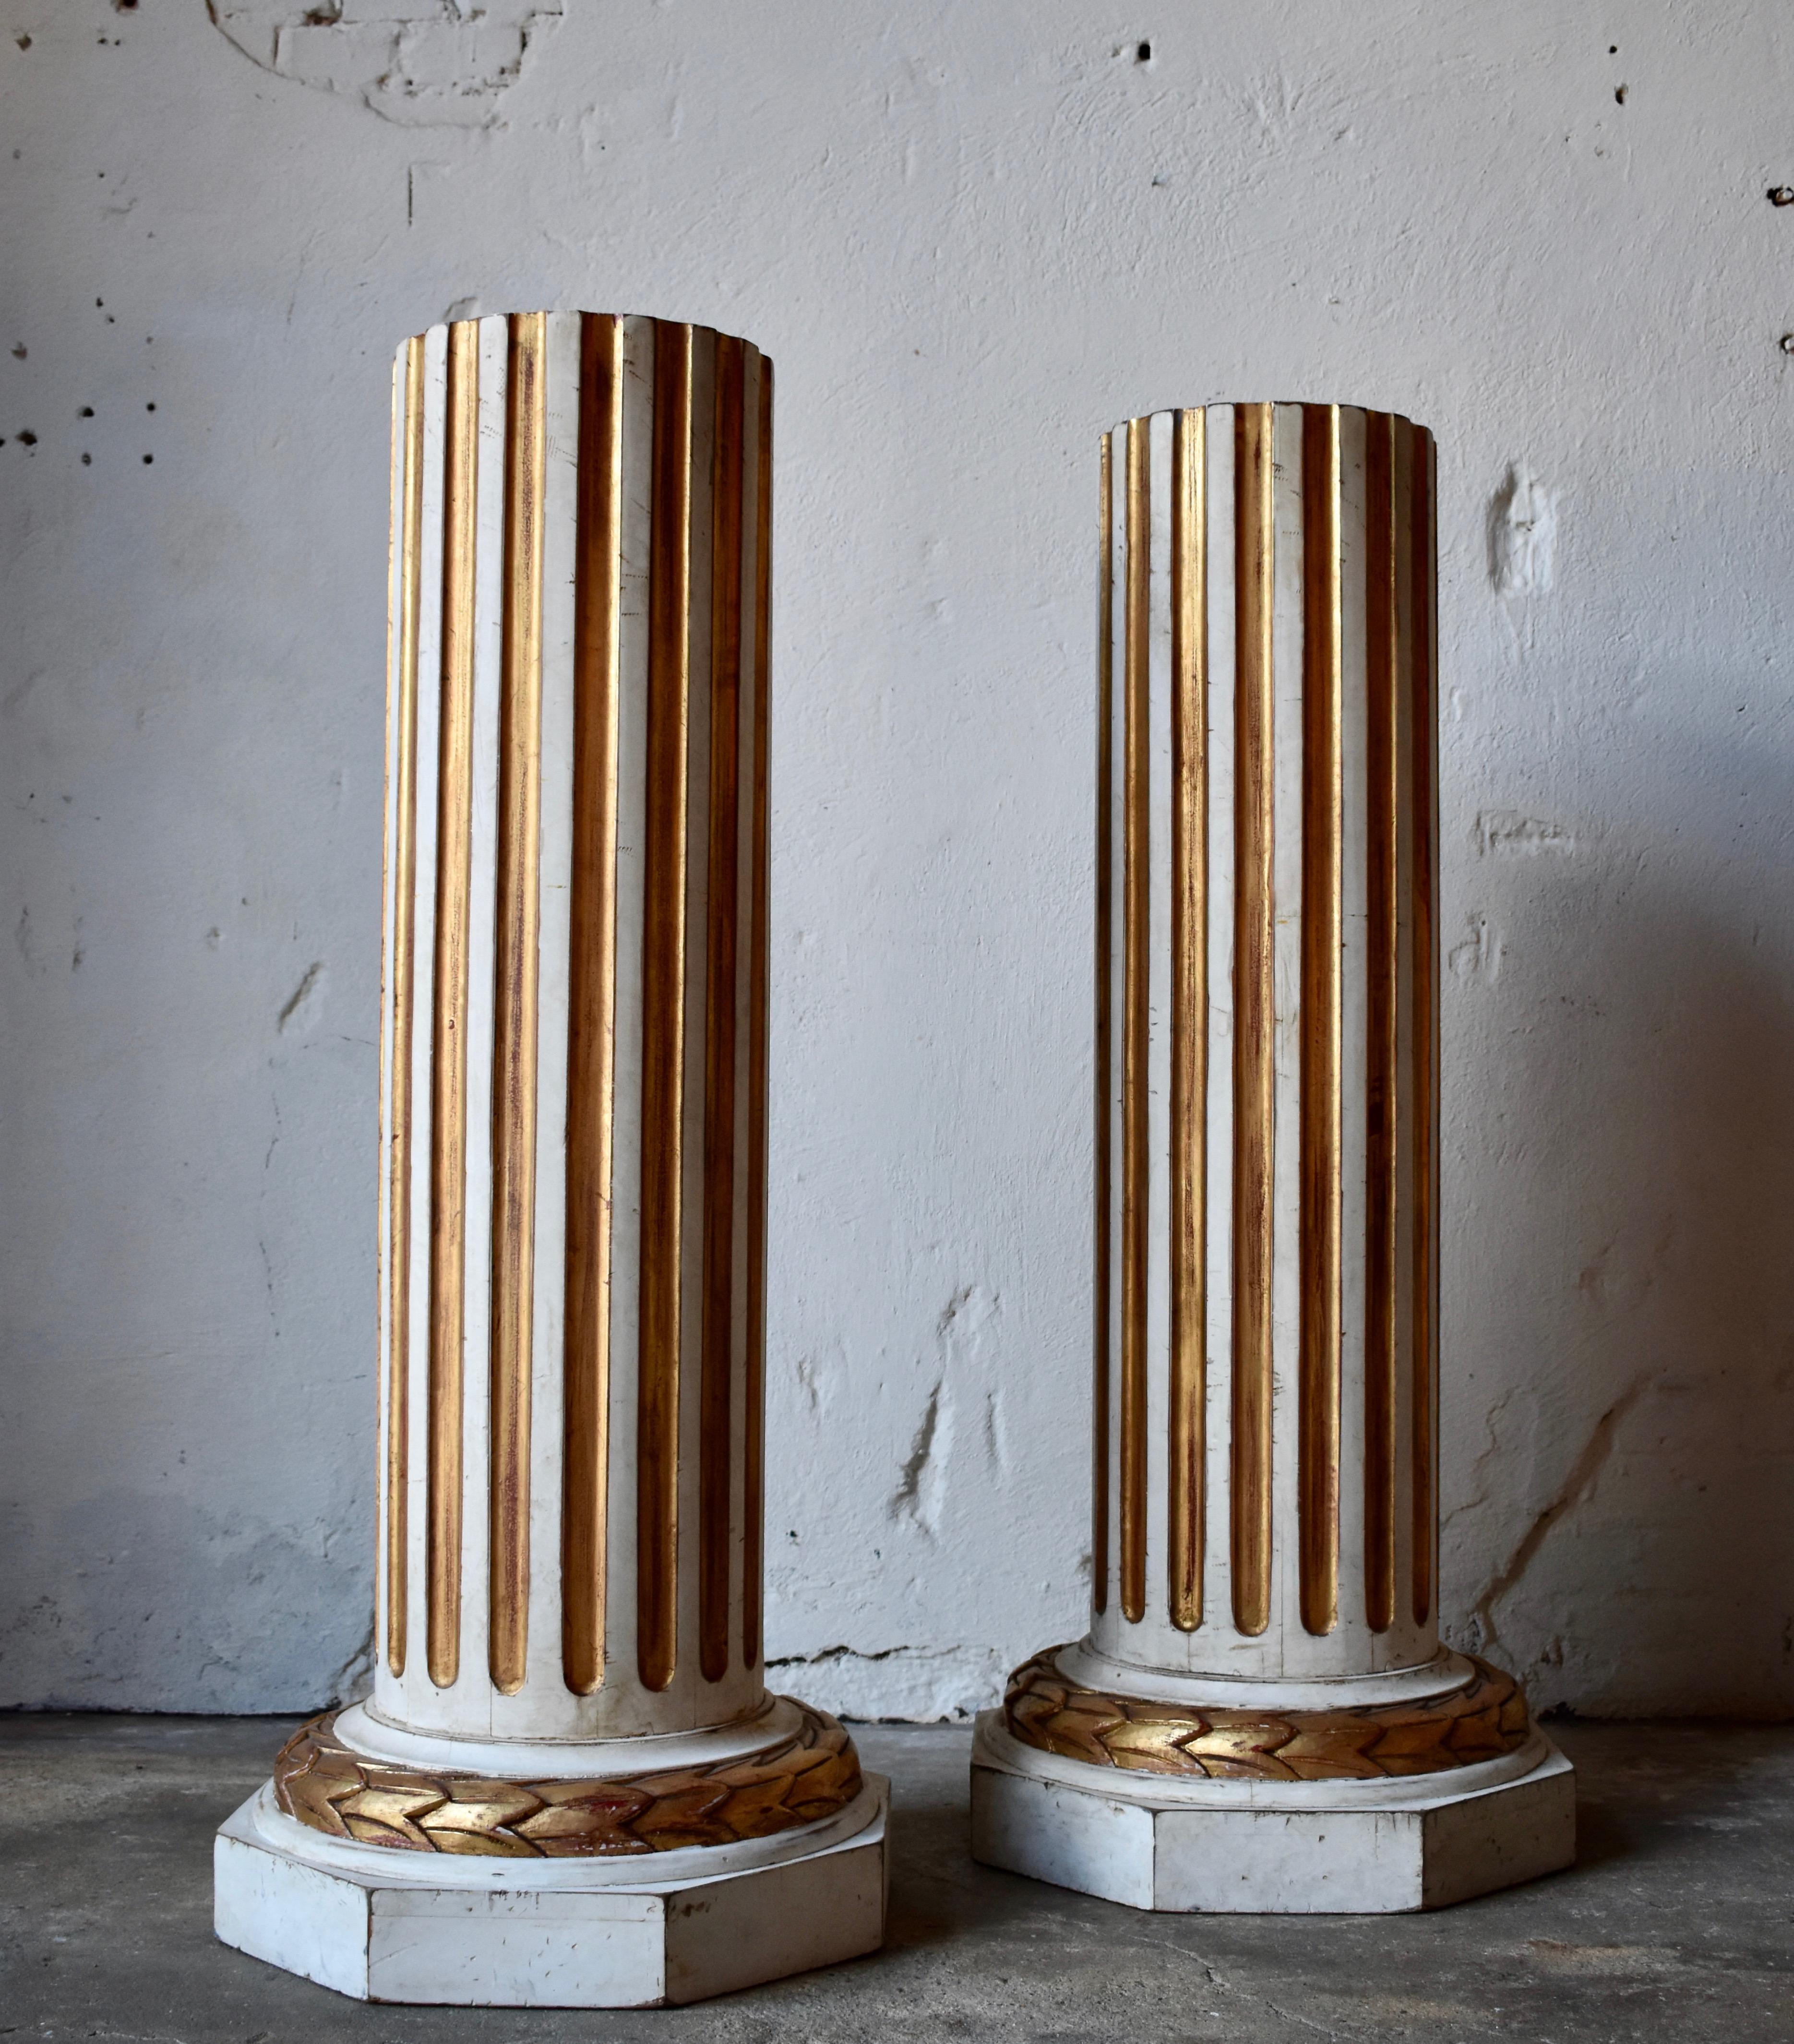 20th century pedestals in Gustavian Style
Painted and giltwood details.

Early to mid-20th century 
beautiful patina.